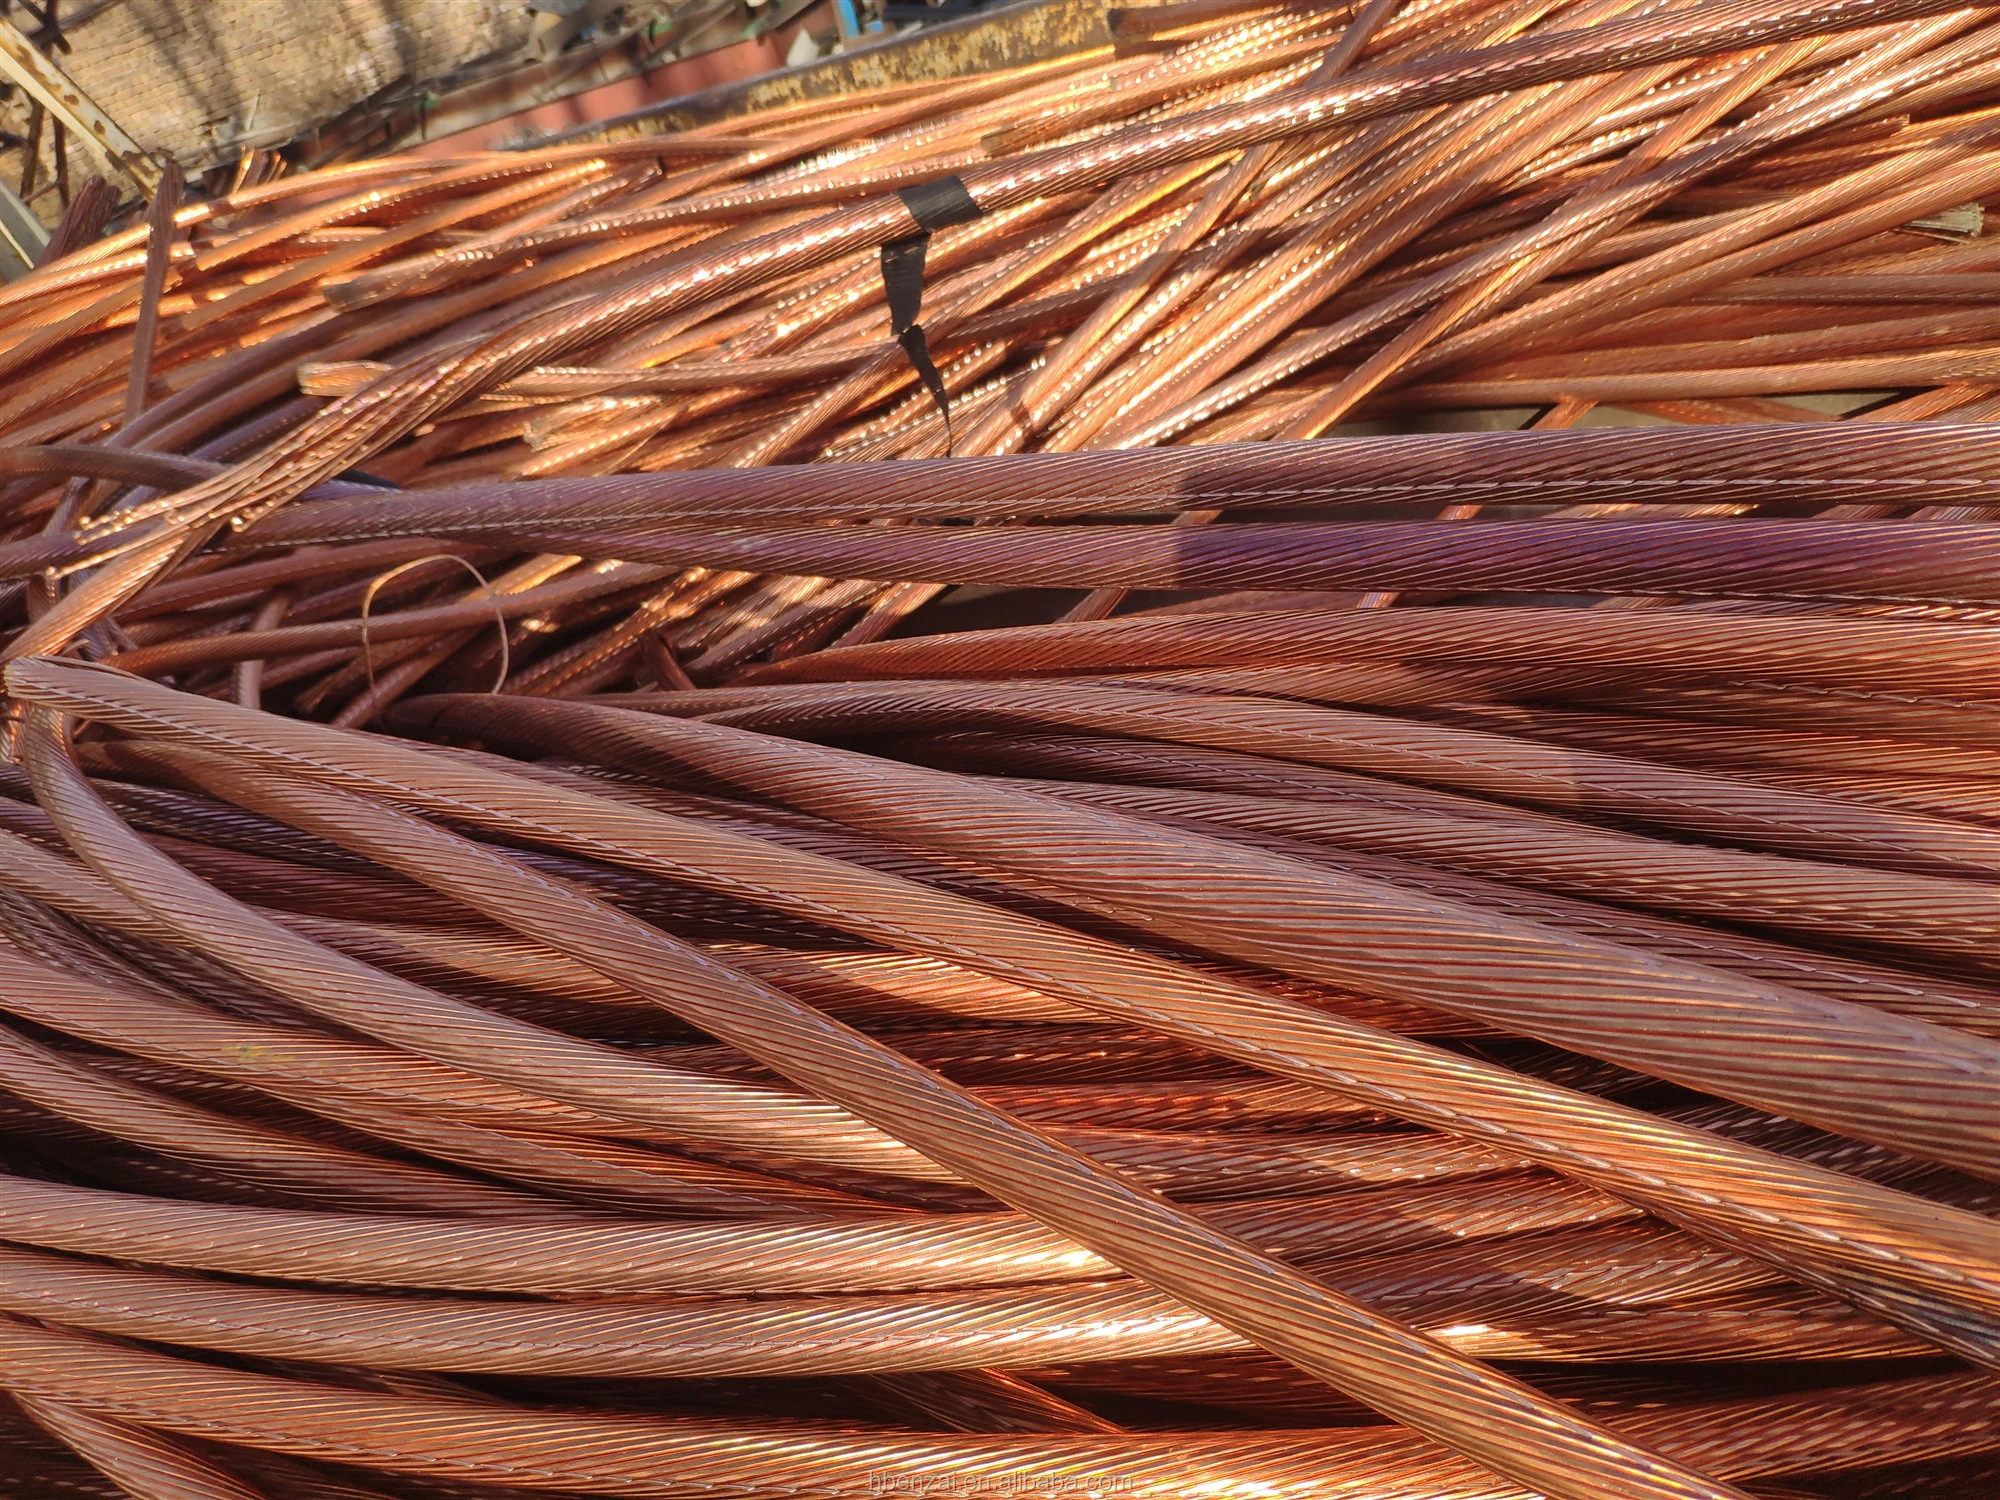 99.99% scrap copper with high purity